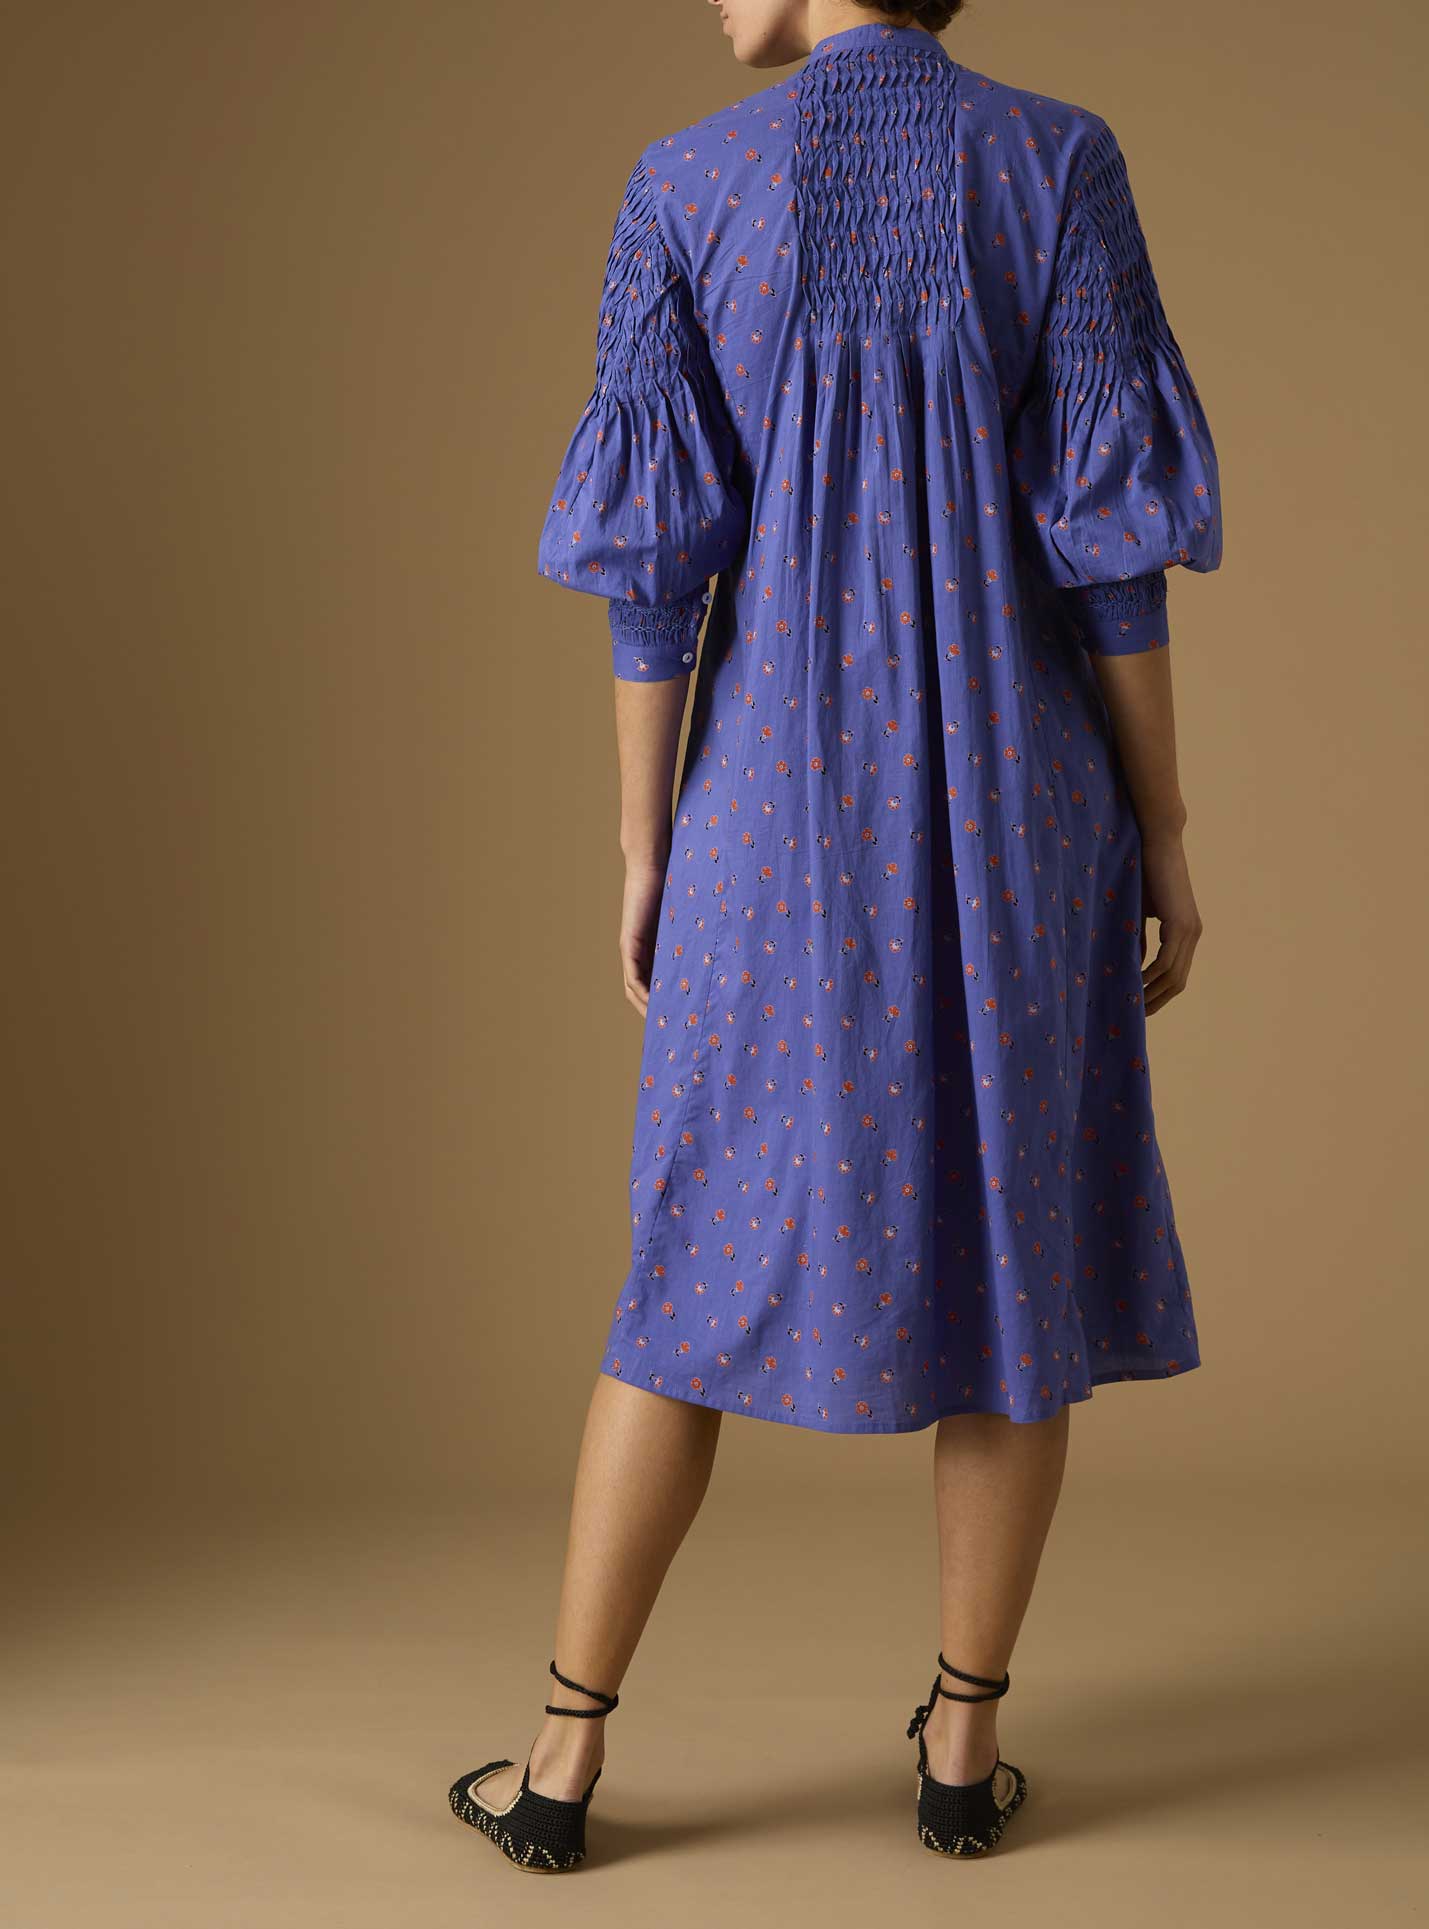 Back view of Yvana Blue dress by Thierry Colson - Pre Spring 2024